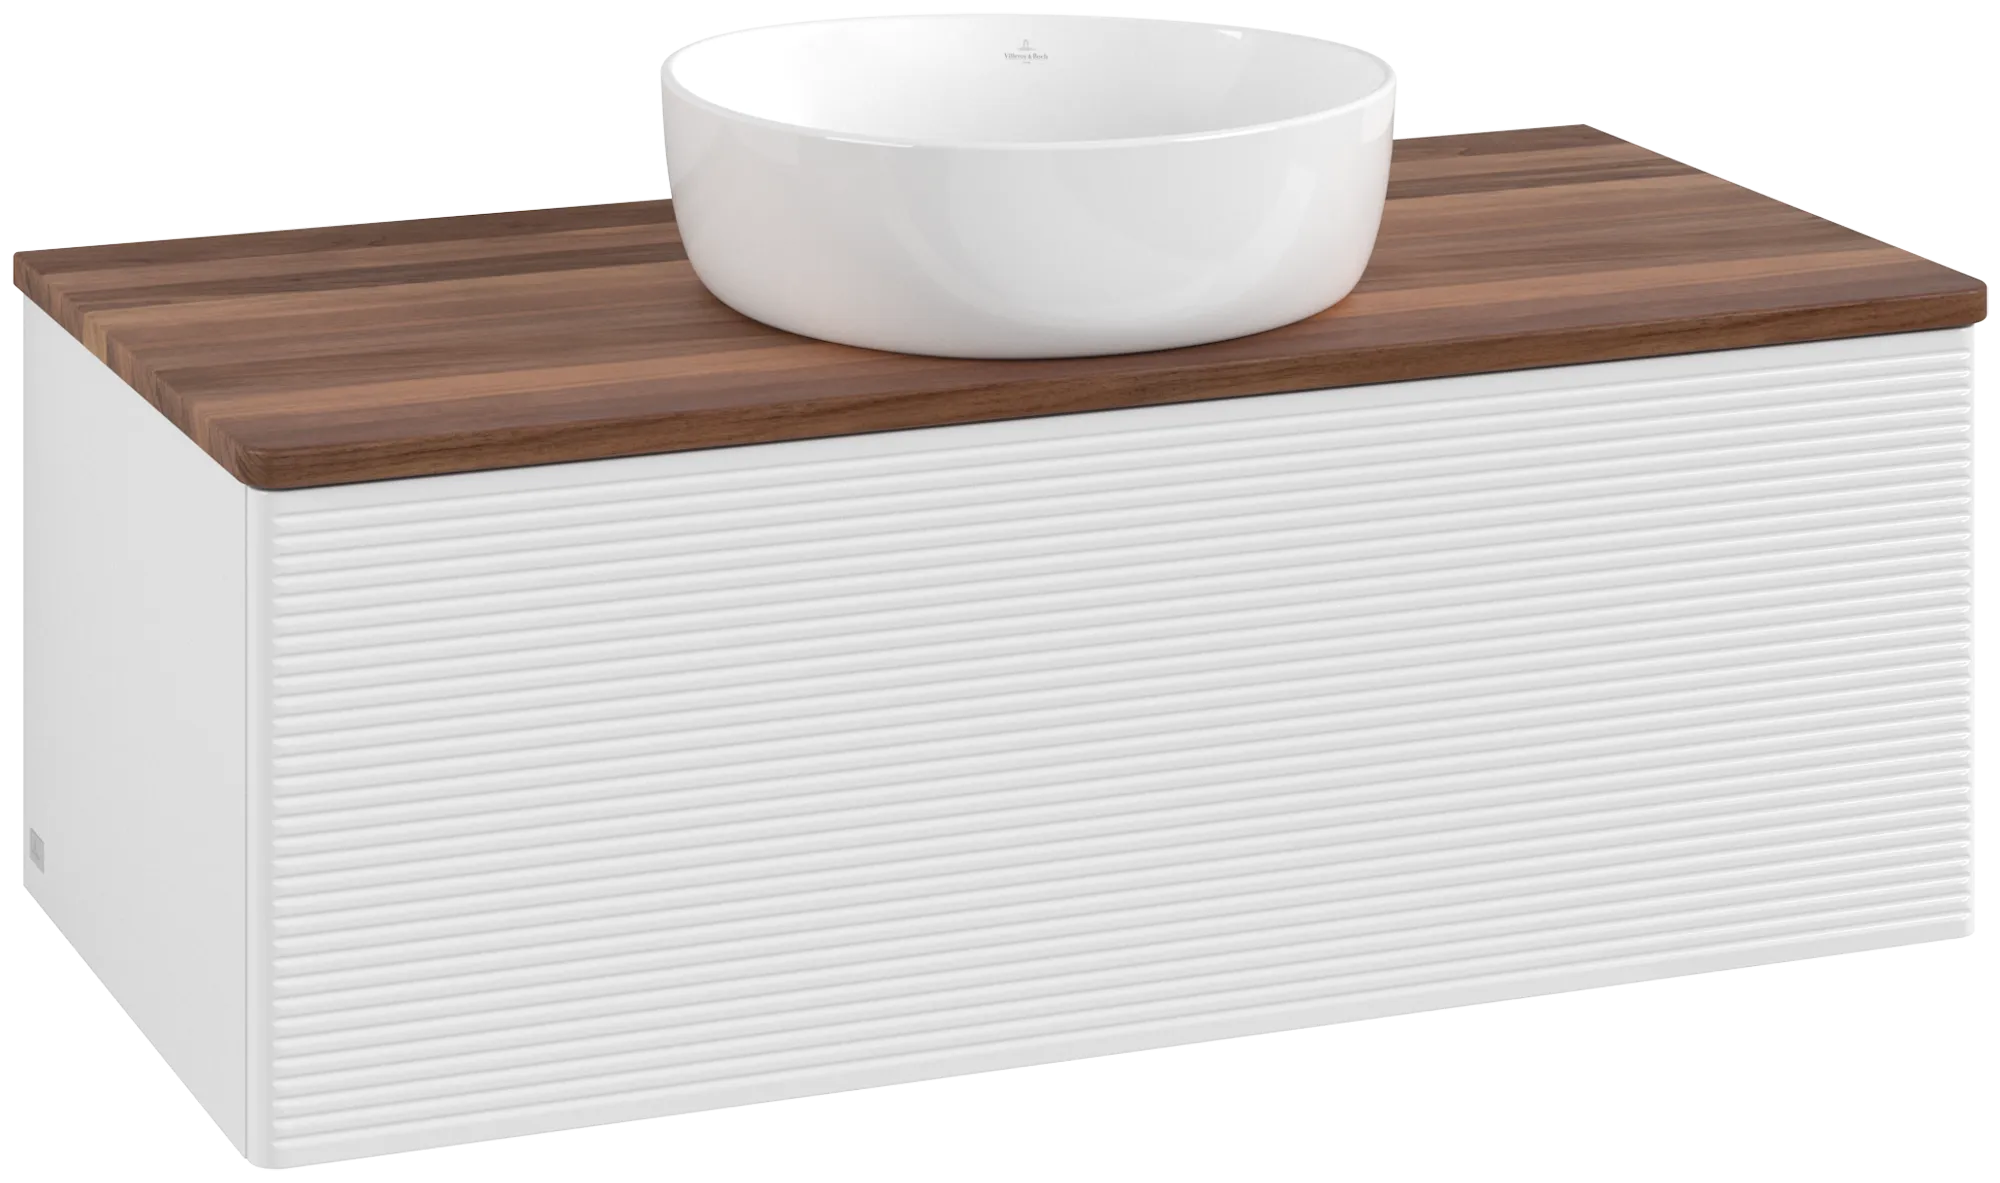 Picture of VILLEROY BOCH Antao Vanity unit, with lighting, 1 pull-out compartment, 1000 x 360 x 500 mm, Front with grain texture, Glossy White Lacquer / Warm Walnut #L31112GF